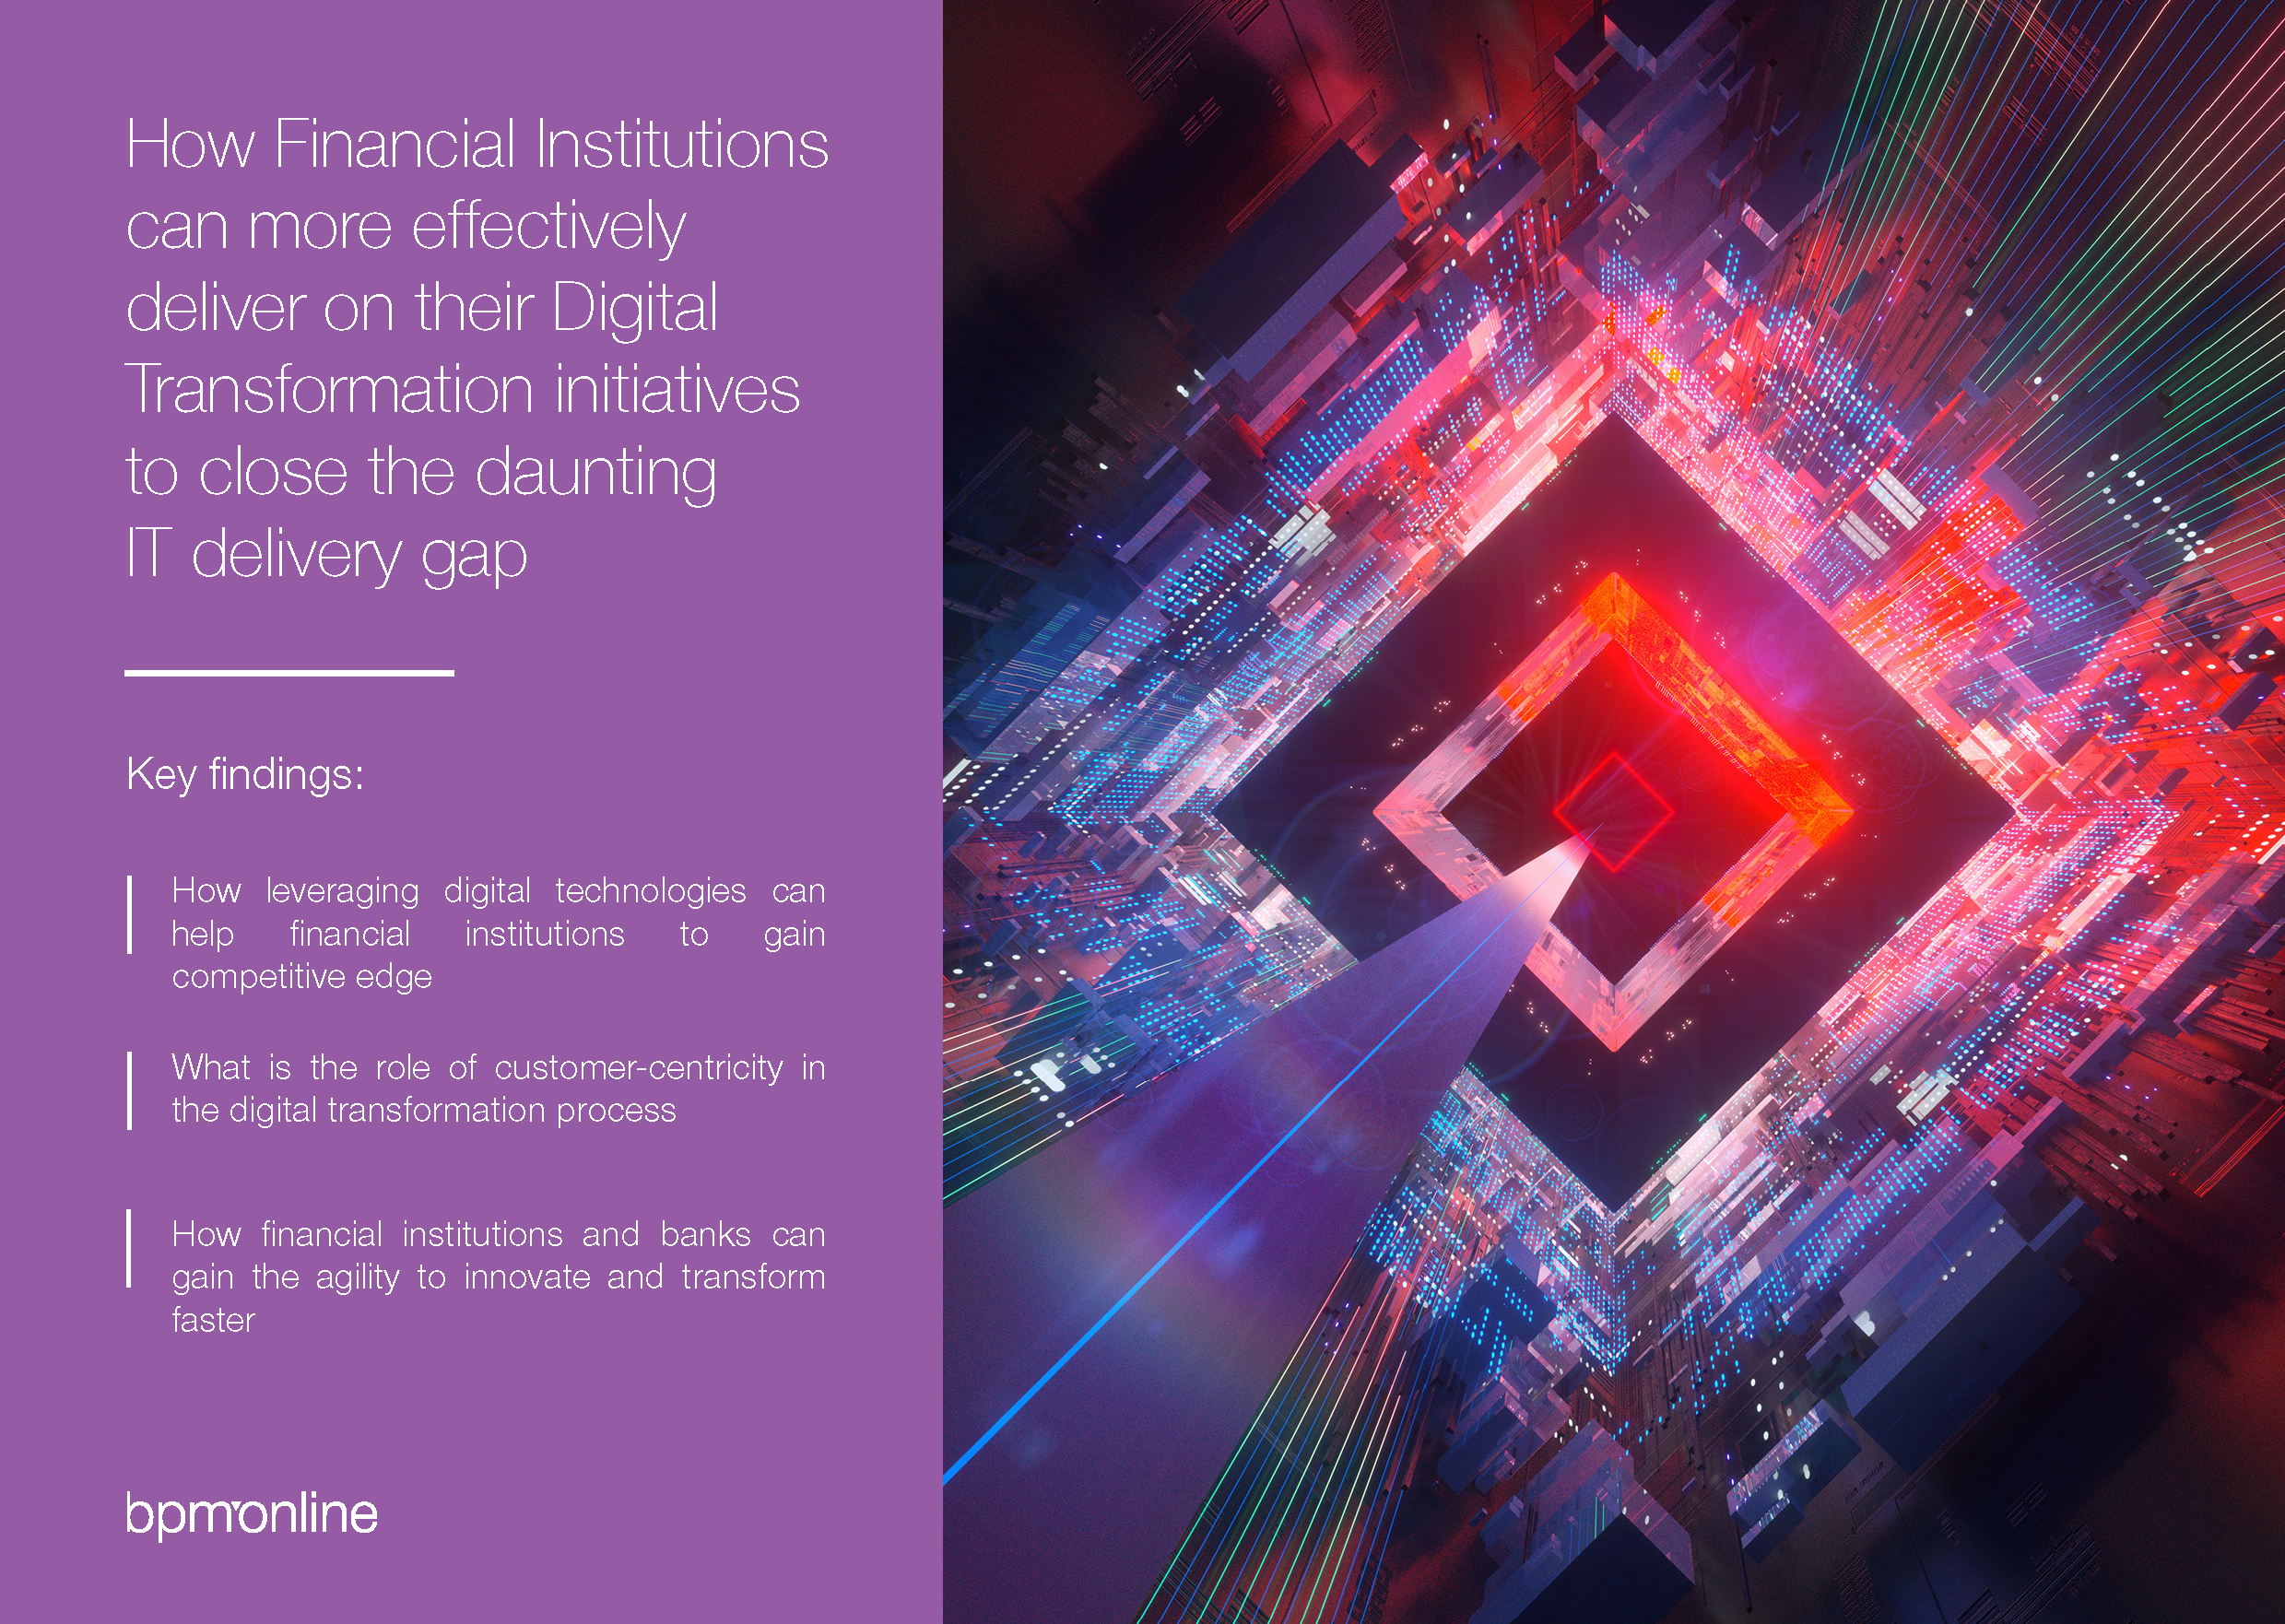 How Financial Institutions can more effectively deliver on their Digital Transformation initiatives to close the daunting IT delivery gap